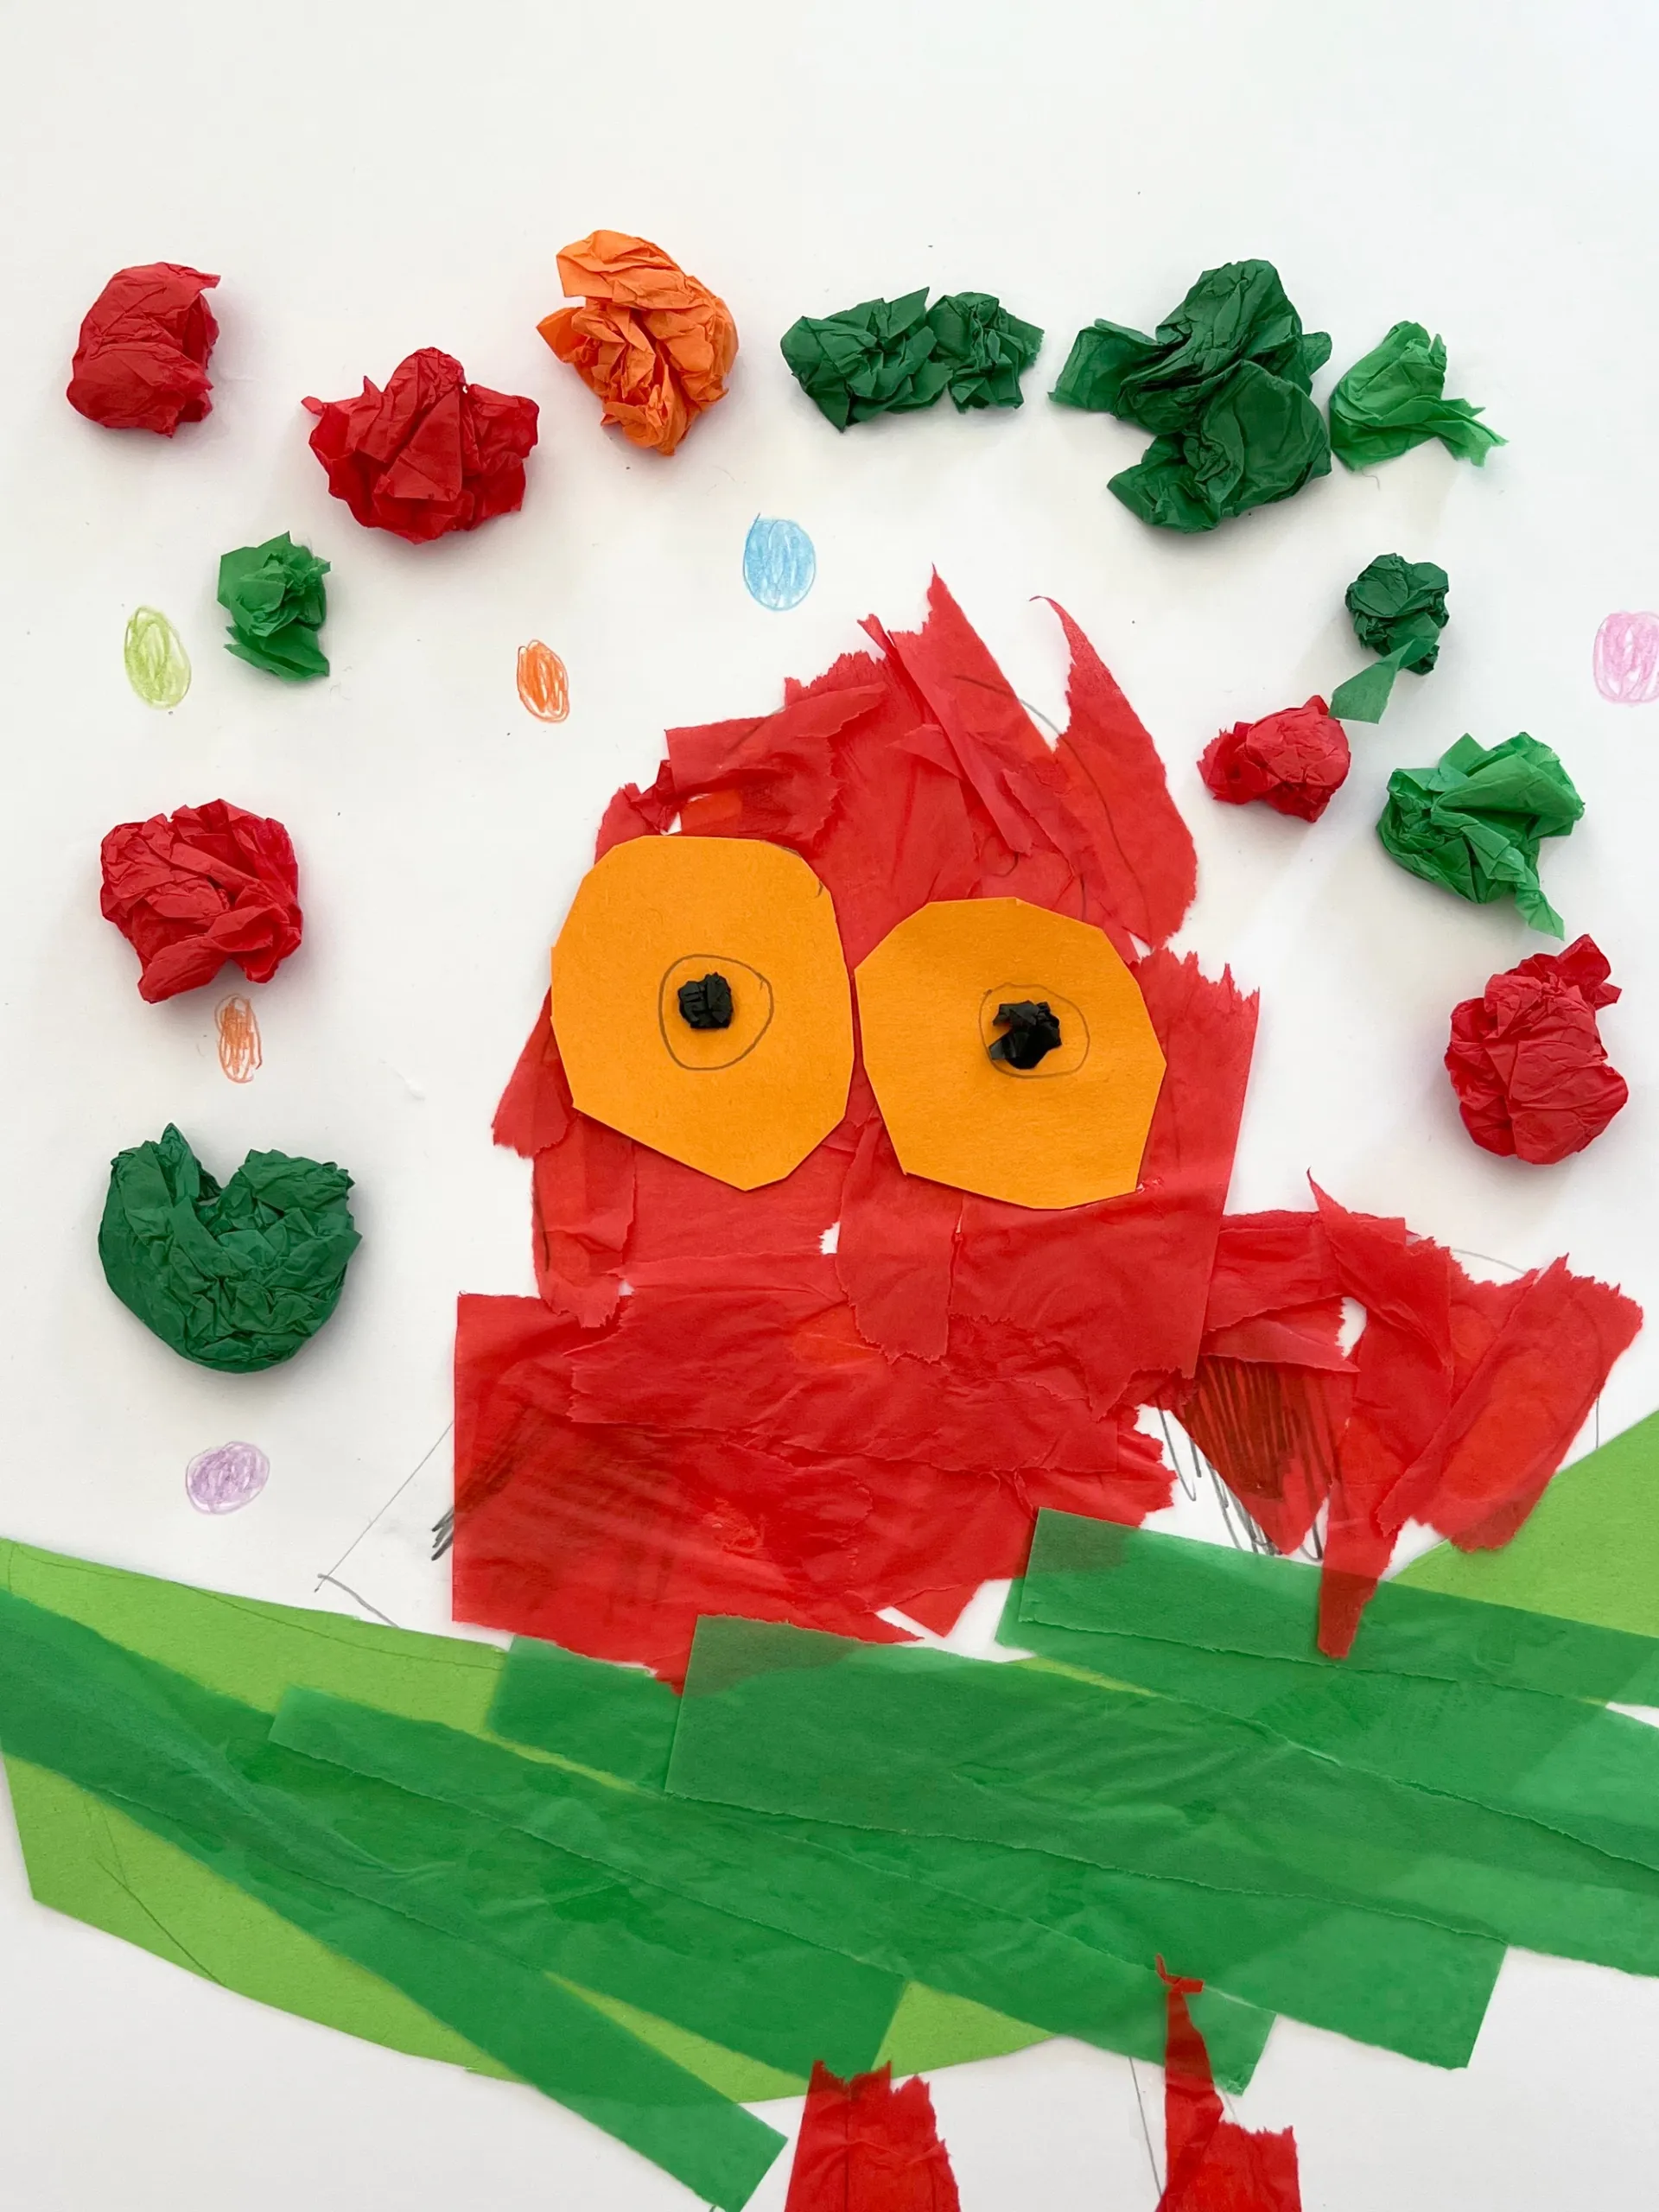 A collage of an owl made from red tissue paper. The owl is sitting on a green branch and has big orange eyes. There are scrunched up pieces of green, red and orange tissue paper in the sky around them.